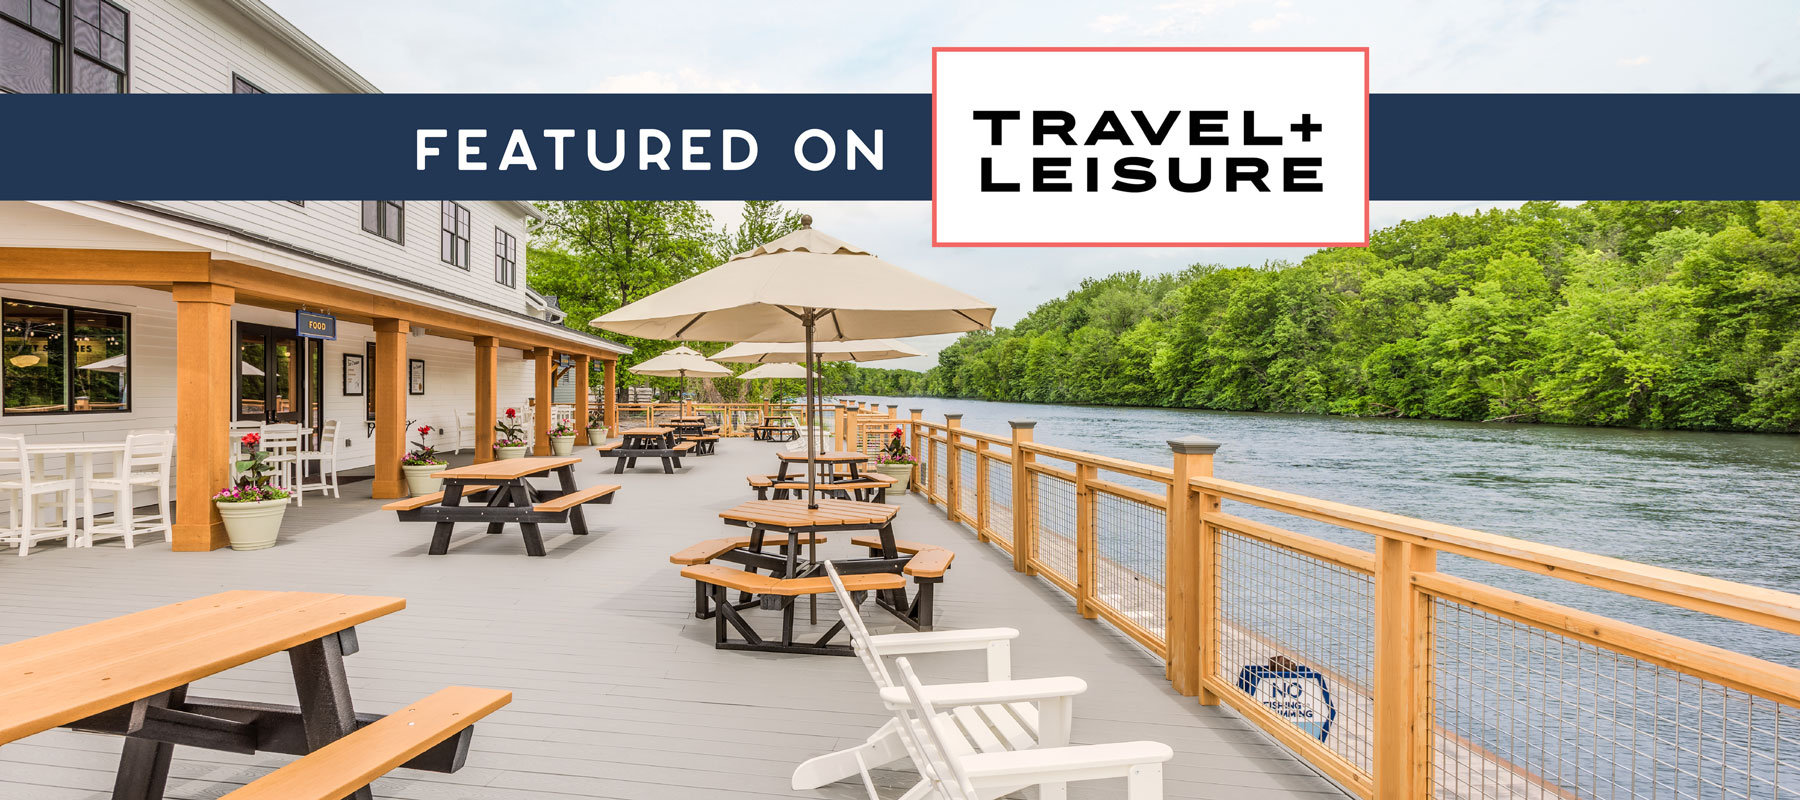 featured on travel and leisure